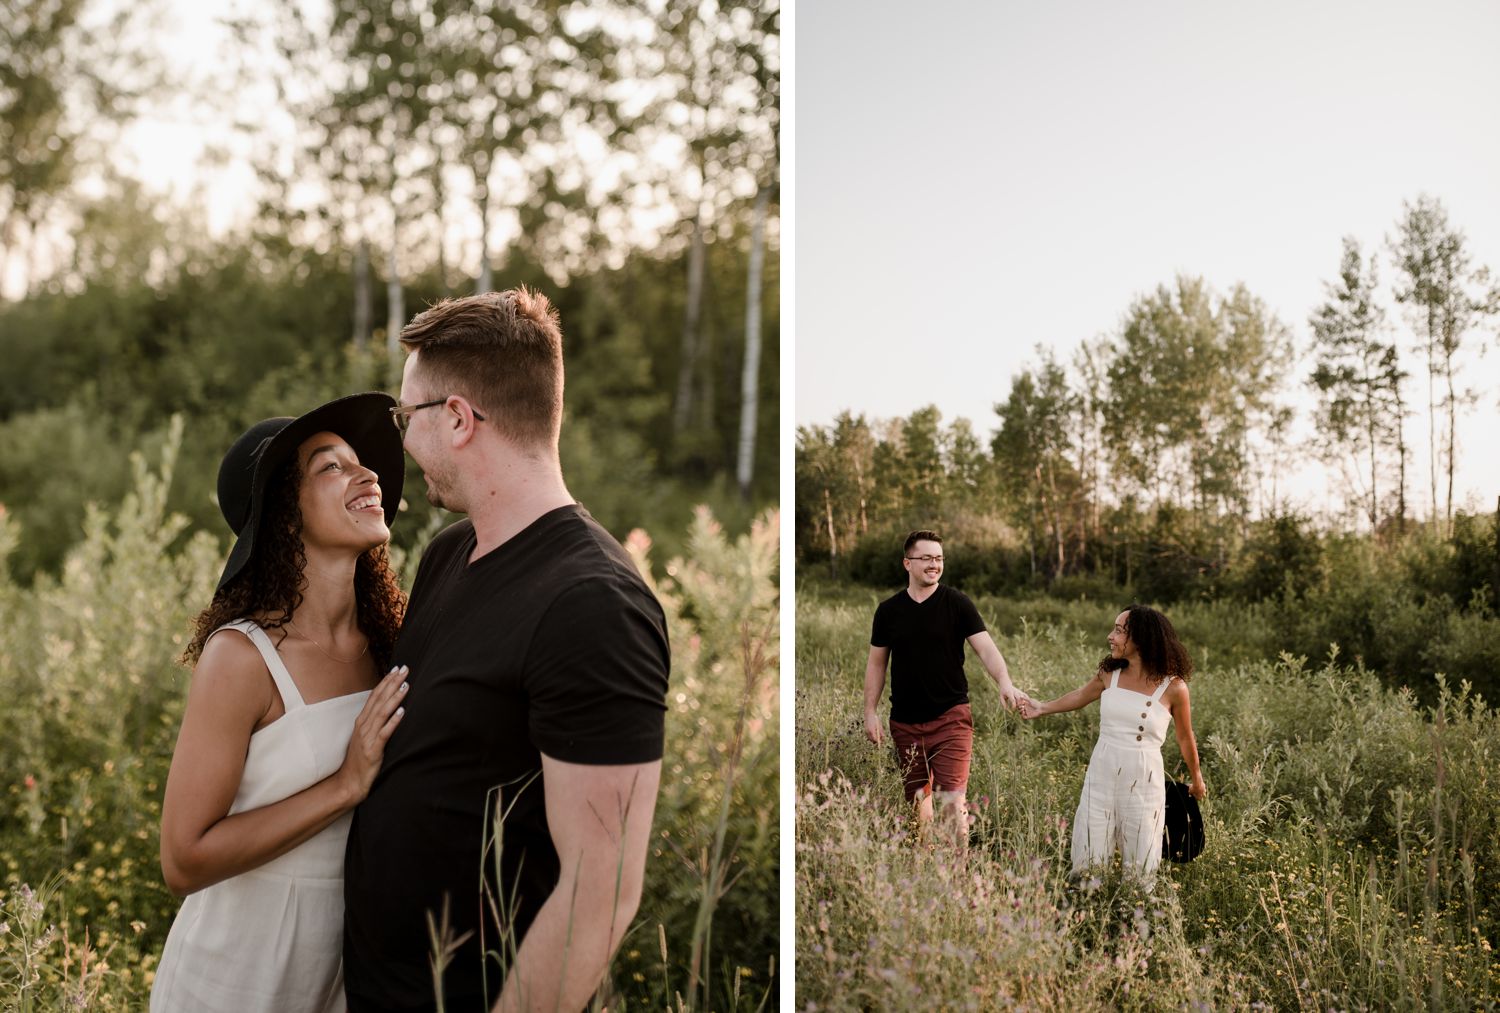 Summer honeymoon session in Sandilands, photographed by Vanessa Renae Photography, a Calgary engagement photographer, available across canada